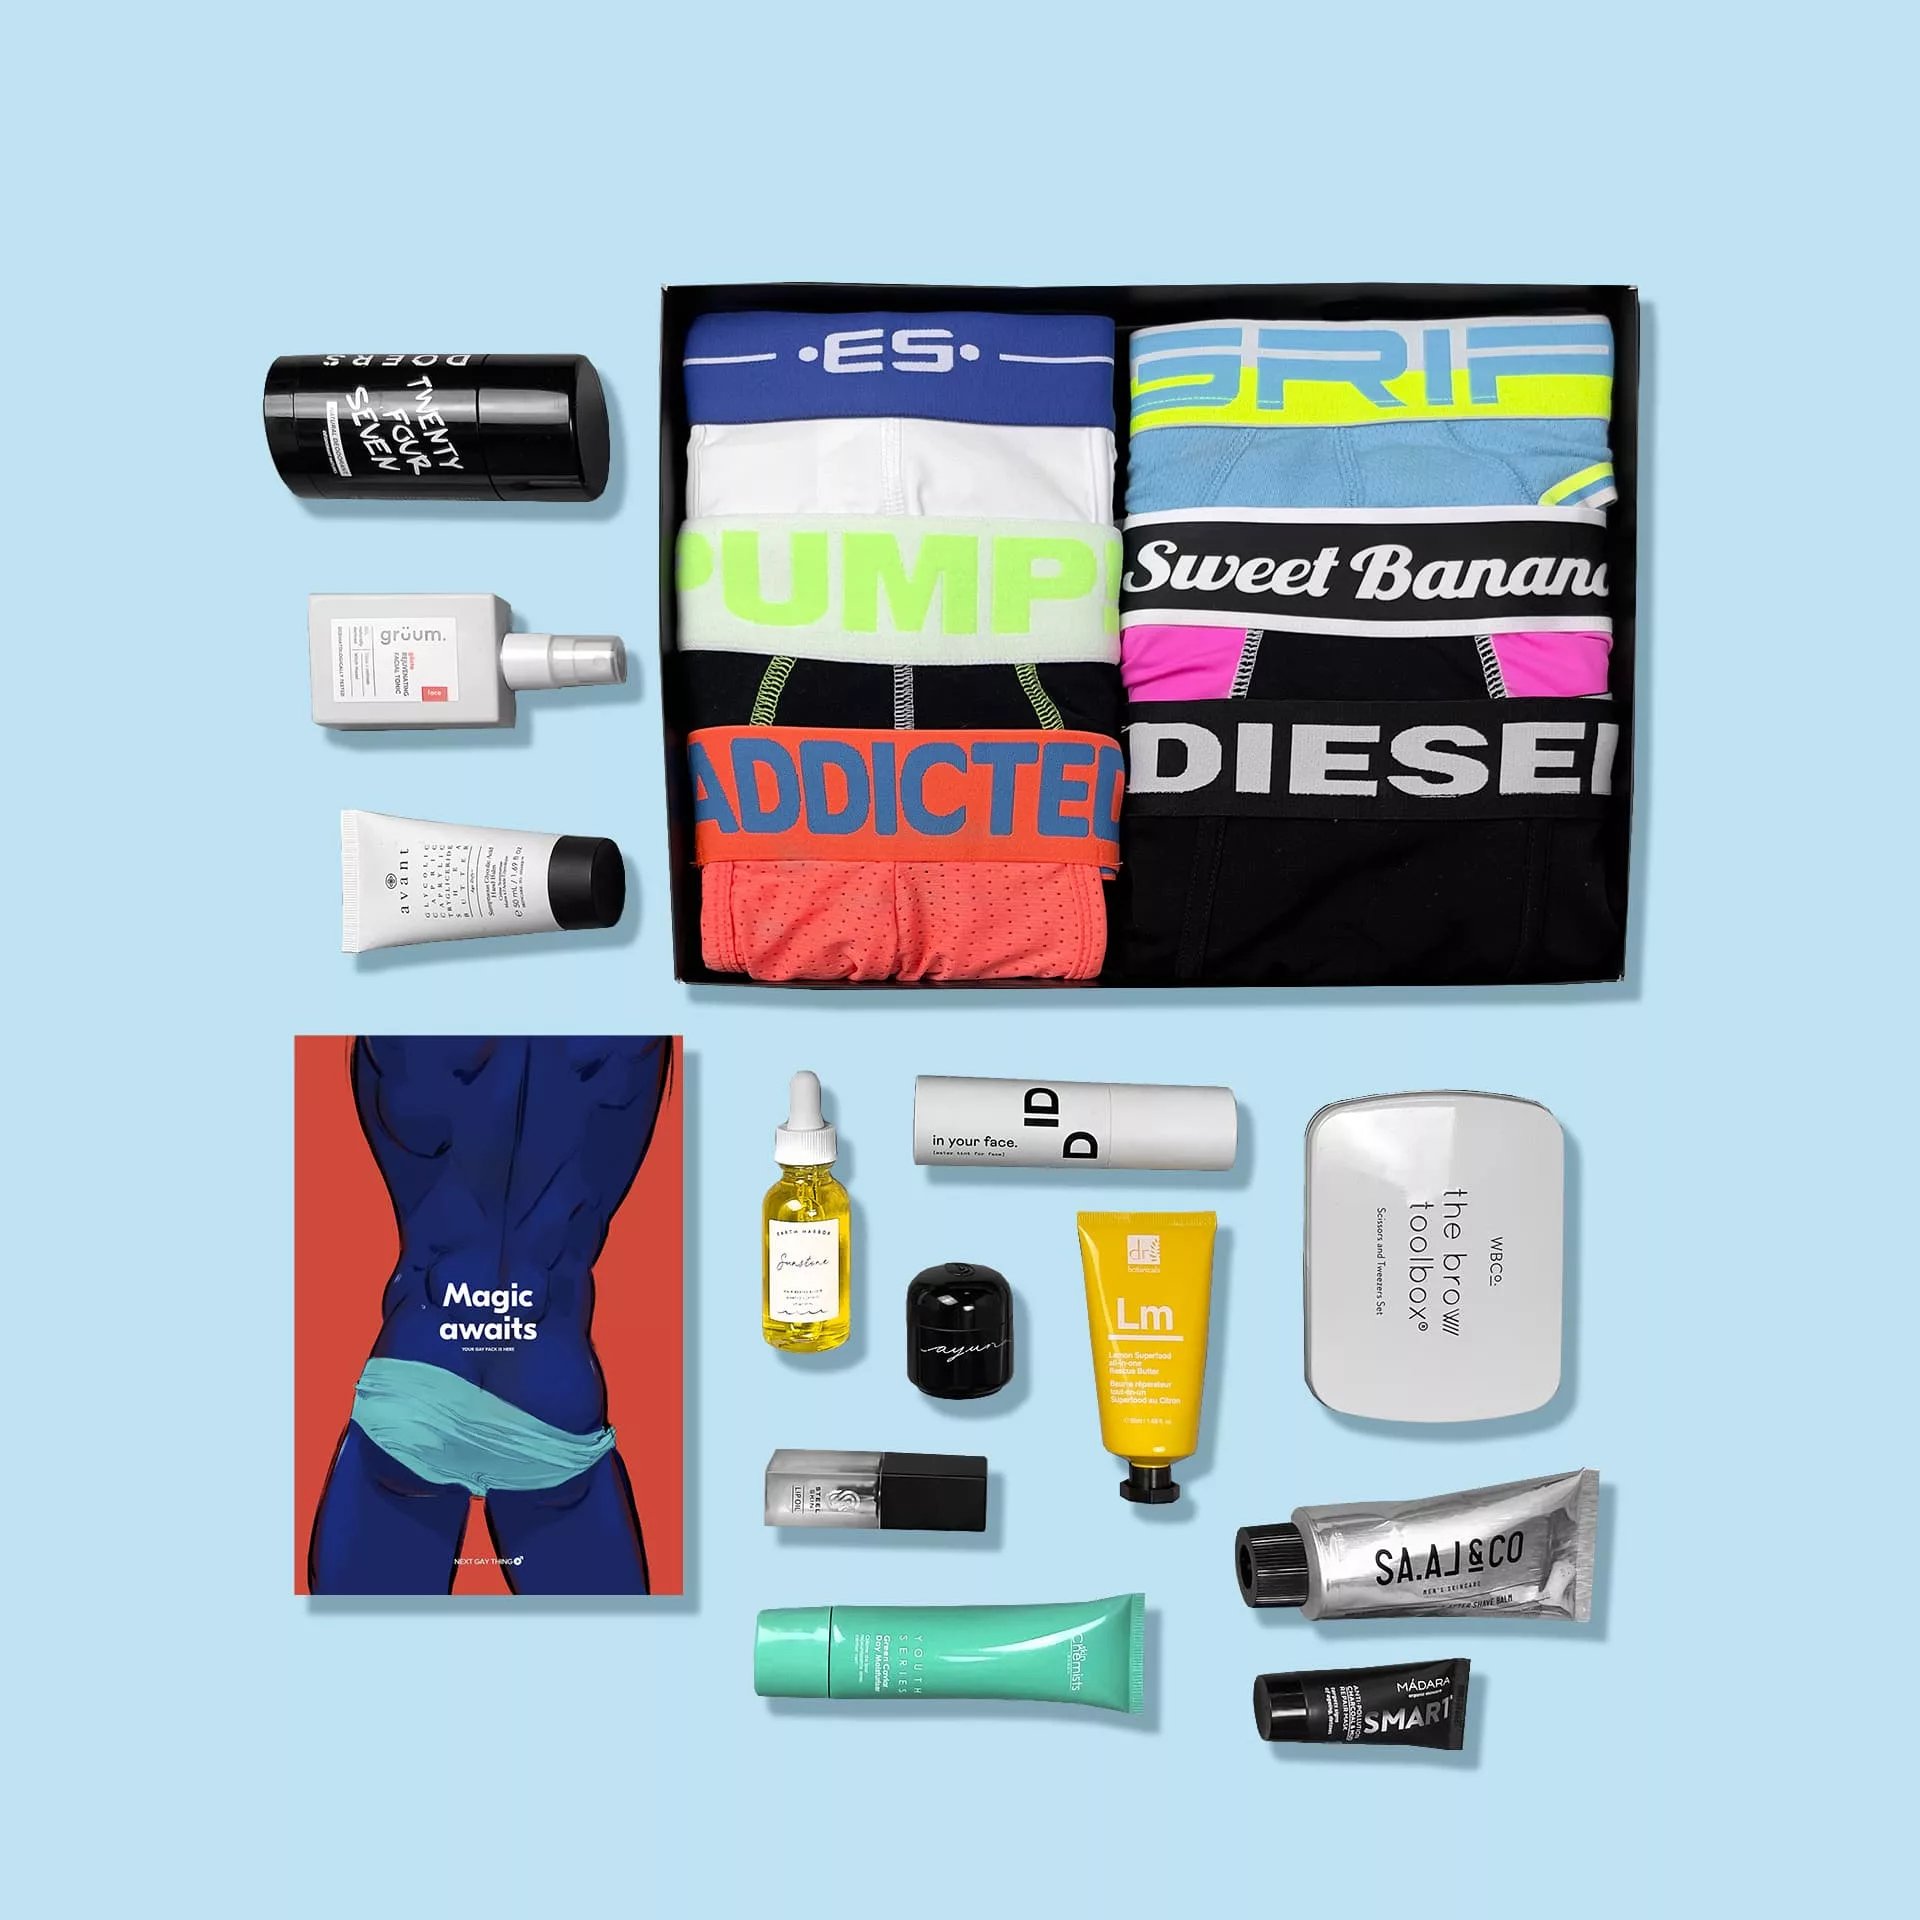 Next Gay Thing – Underwear & grooming subscription box for gay men